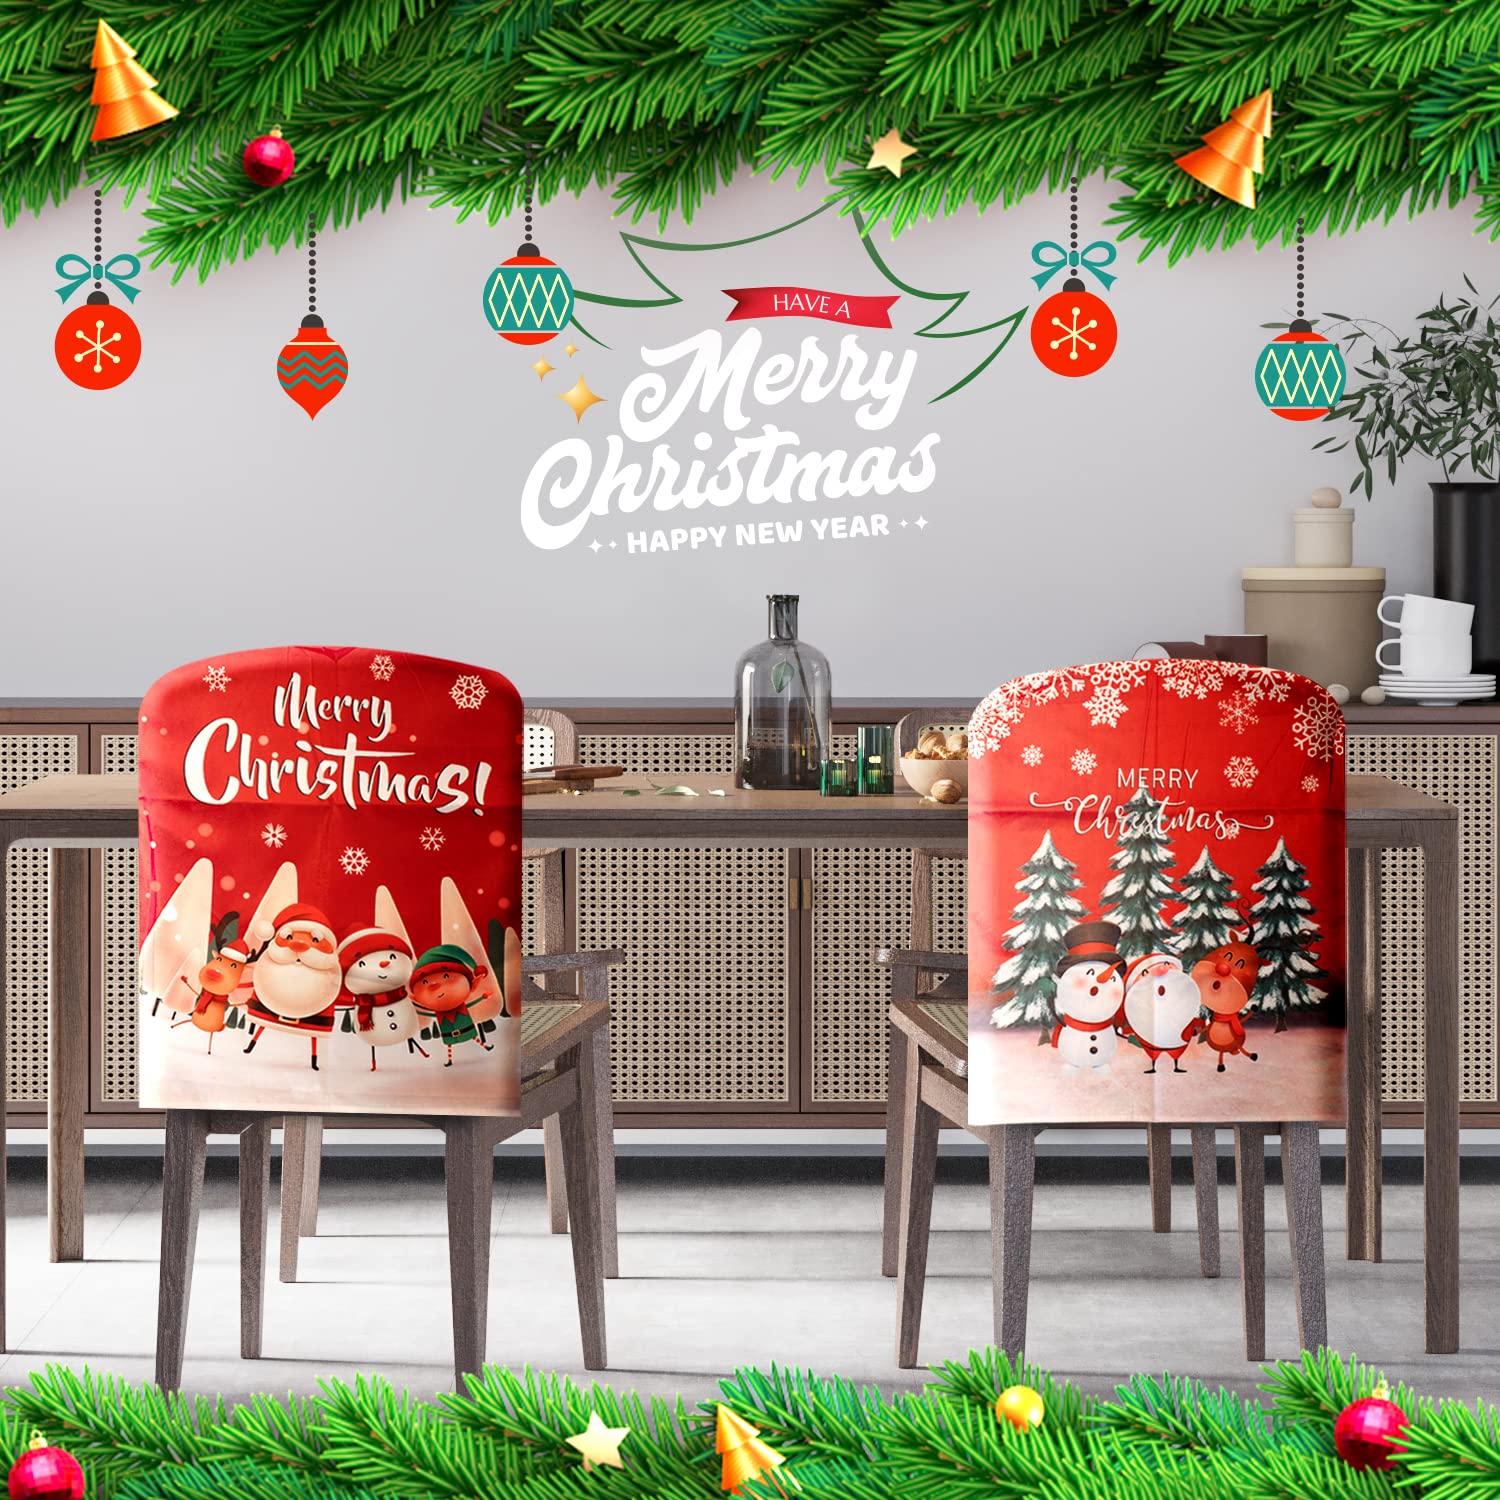 1Pc Christmas Back Chair Covers Printing Christmas Tree Snowman Covers for Home, Kitchen, Dining Room Decor KGORGE Store